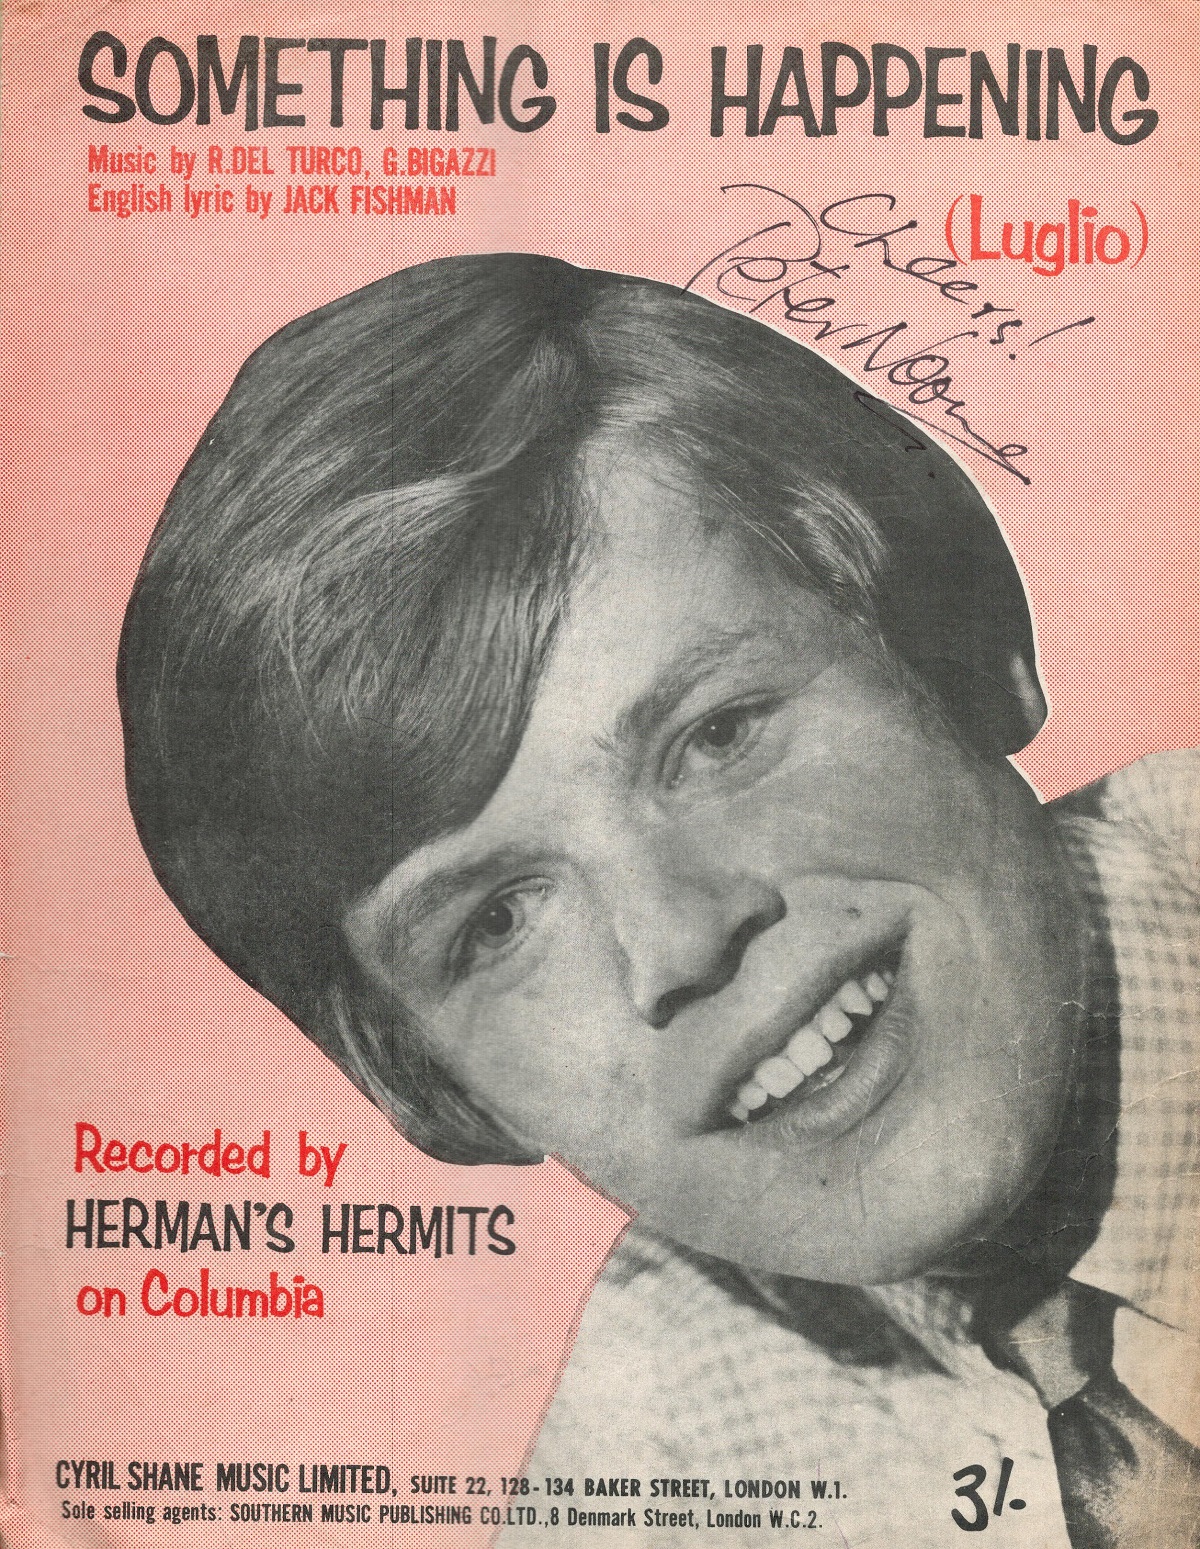 Herman's Hermits 'Something Is Happening' Sheet Music Signed By Peter Noone. Good condition. All